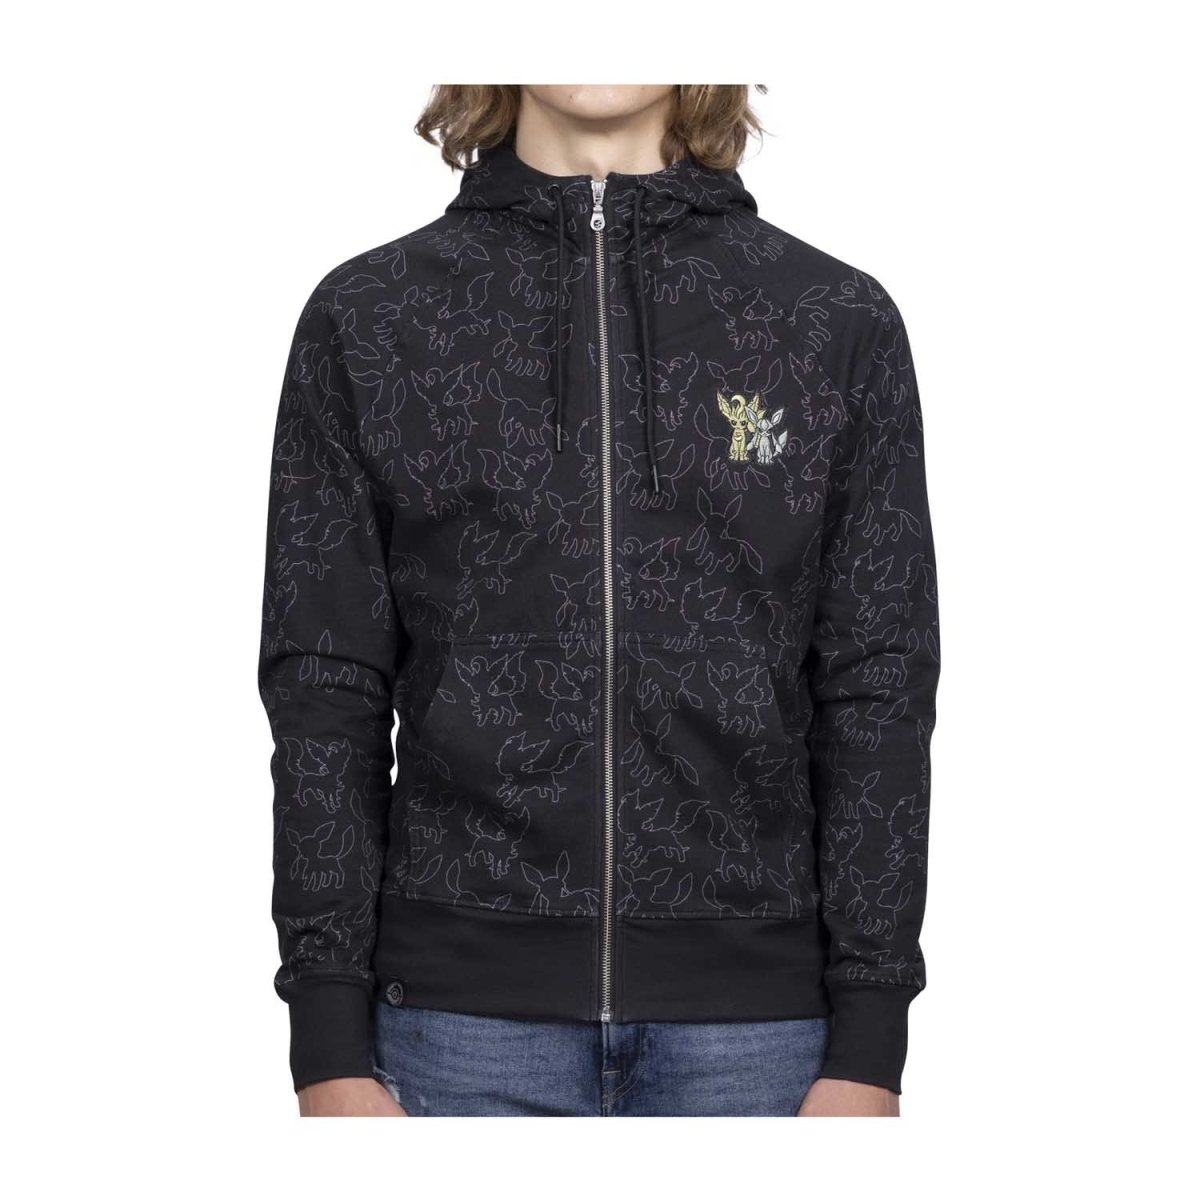 Leafeon & Glaceon Black Allover-Print Zip-Up Hoodie - Adult